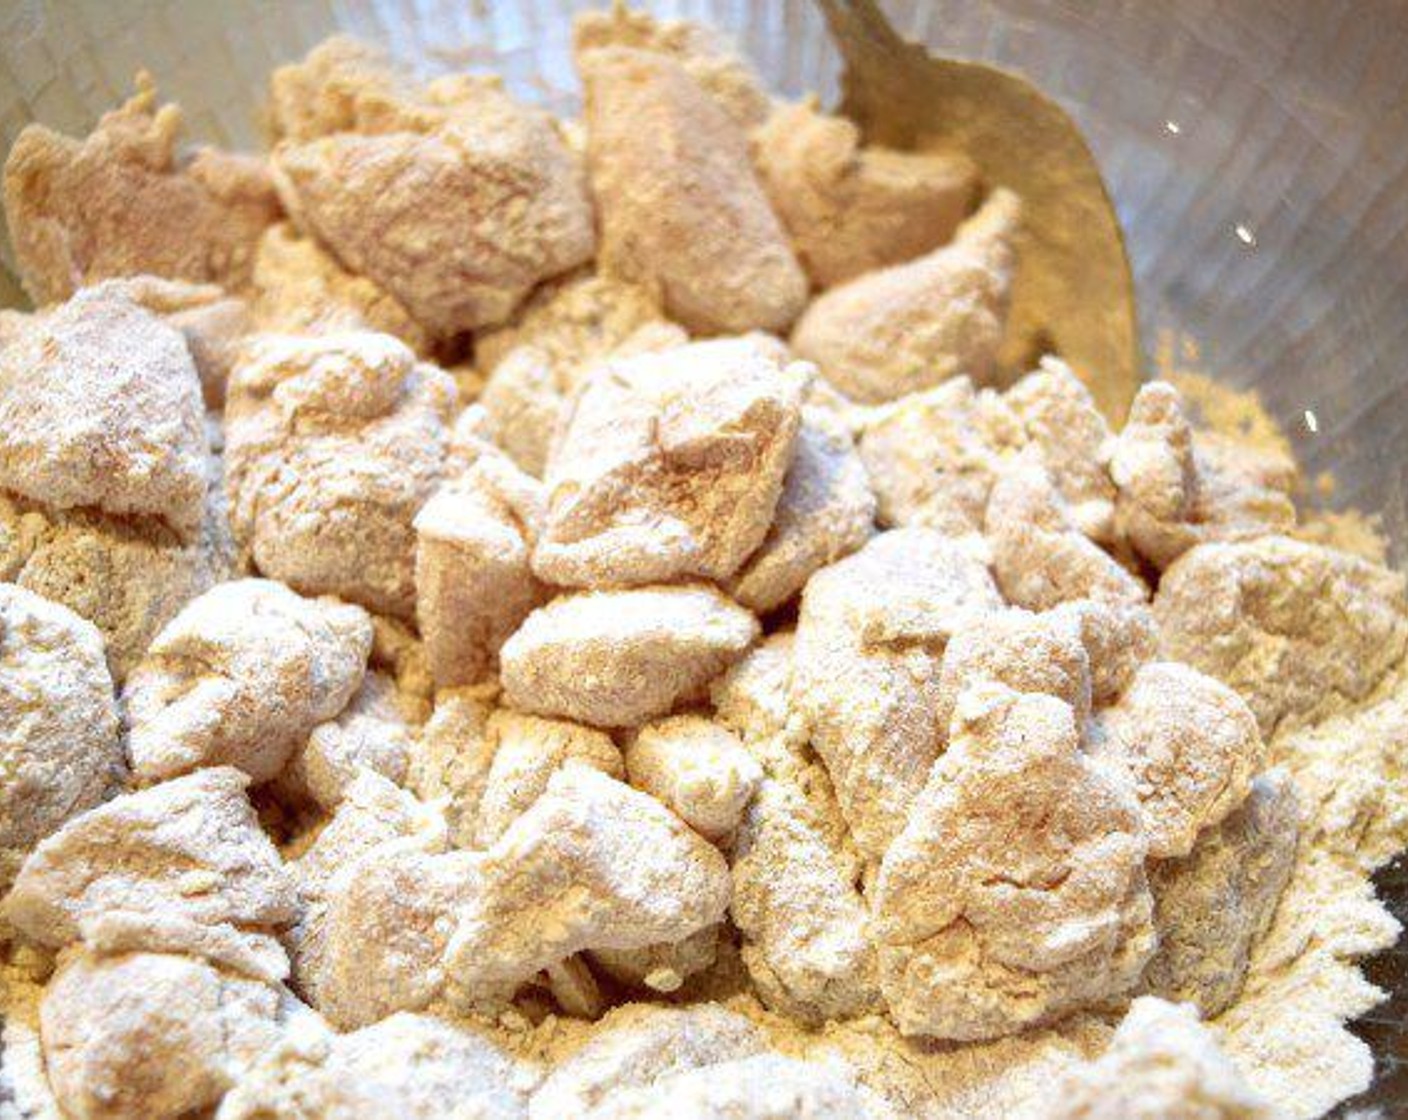 step 1 Cut Chicken Tenders (1 lb) into bite-sized pieces and add to a bowl. To that same bowl, add All-Purpose Flour (1 cup), Curry Powder (1 tsp), Salt (1 pinch), and Ground Black Pepper (1 pinch) and stir to coat the chicken.